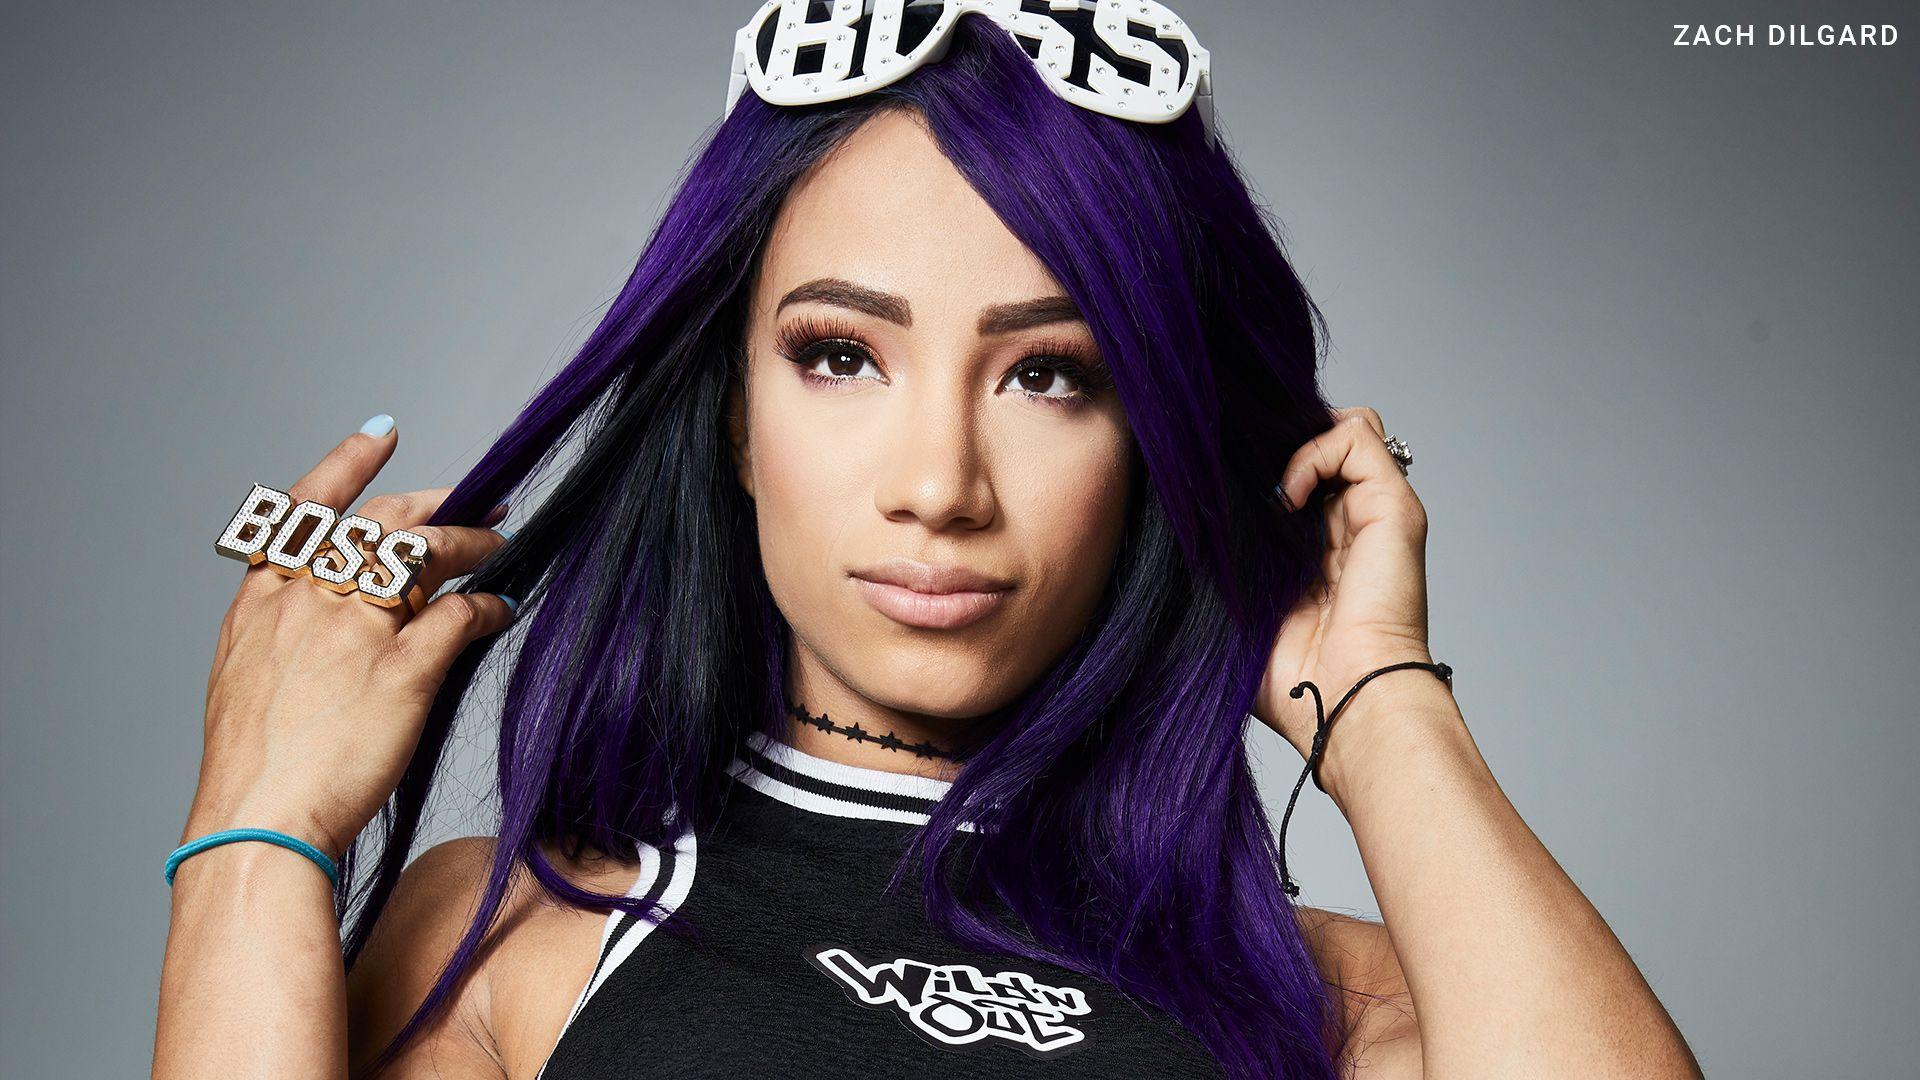 Sasha Banks to appear on this Friday's episode of “Wild 'N Out”